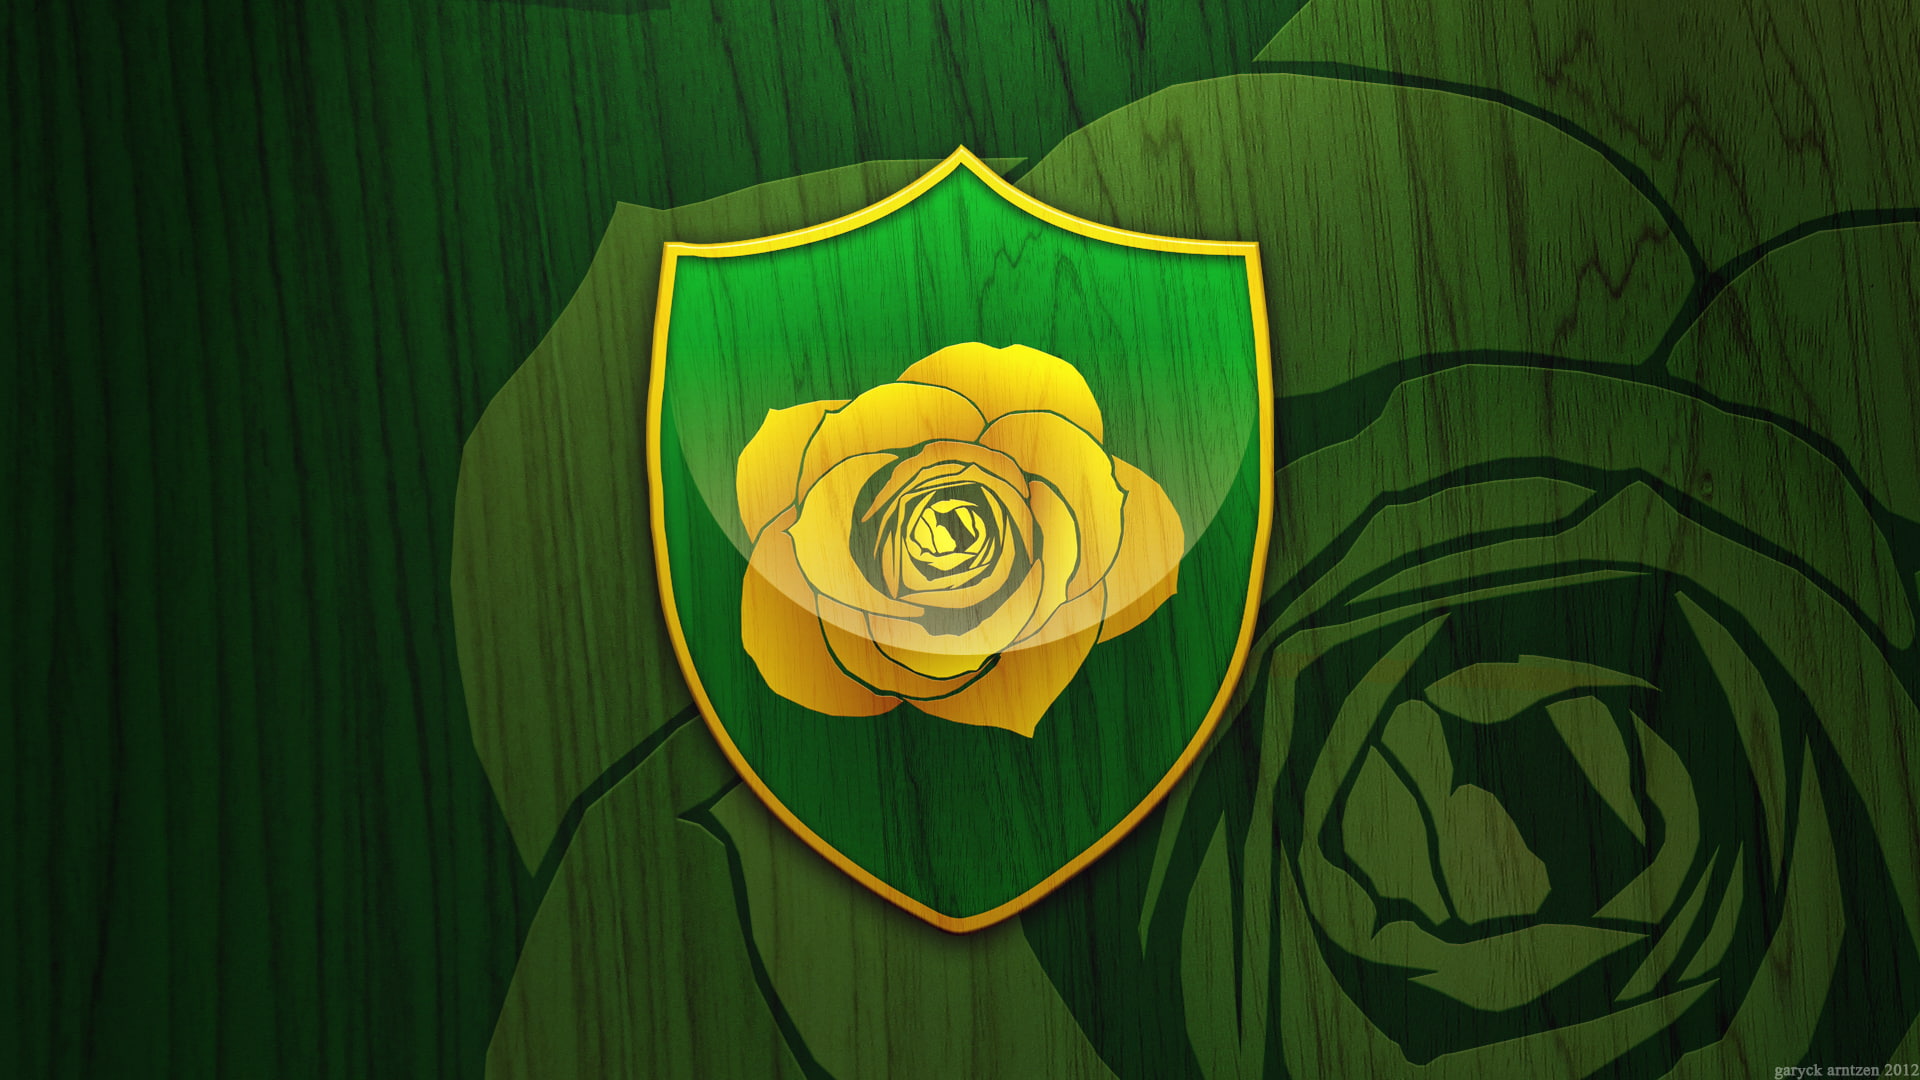 rose, book, the series, coat of arms, motto, A Song of Ice and Fire